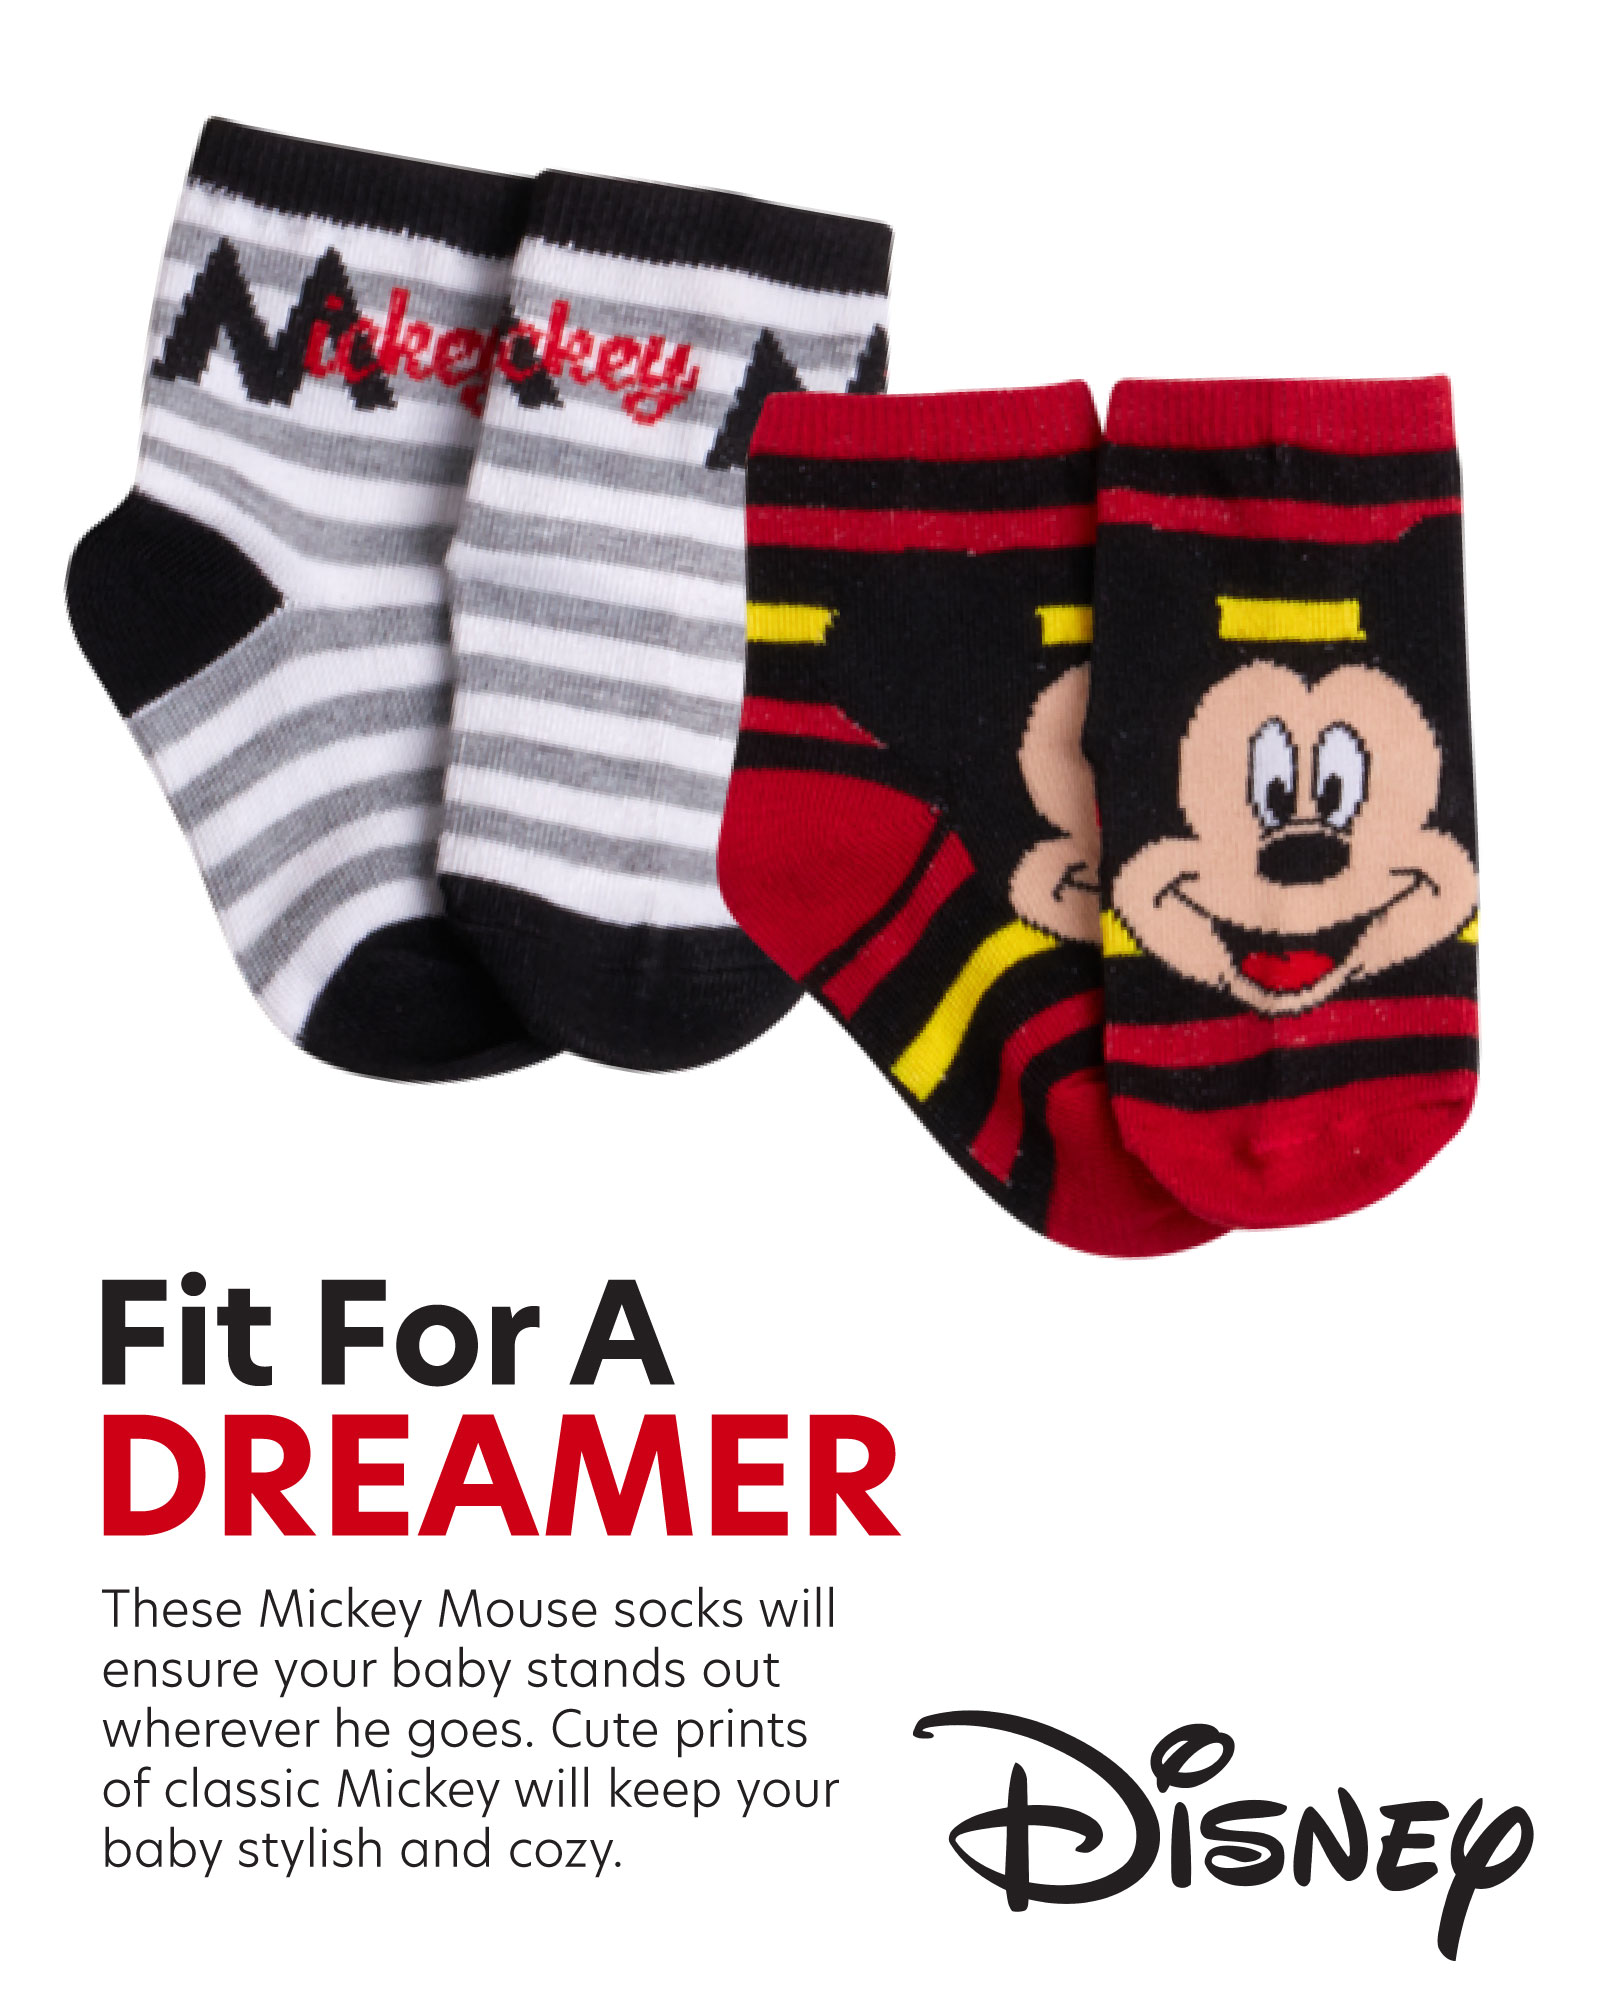 Disney Baby Boys Mickey Mouse Assorted Color Design 12 Pair Socks Set, Age 0-24 Months - image 3 of 5